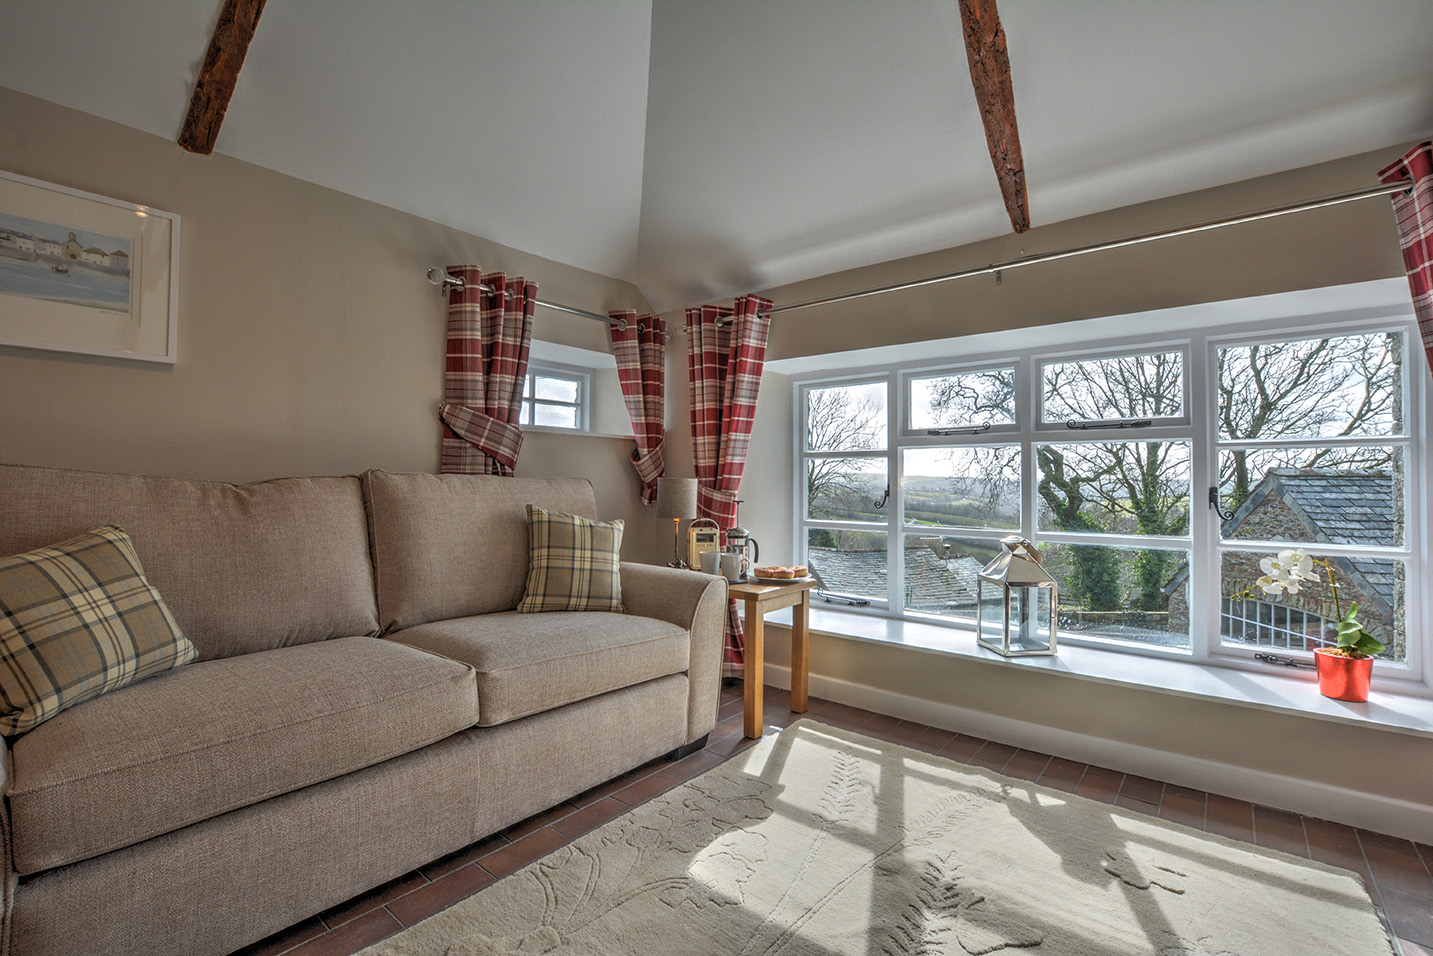 The lounge area of Goosehill luxury self catering converted barn holiday cottage at Penrose Burden in North Cornwall.jpg